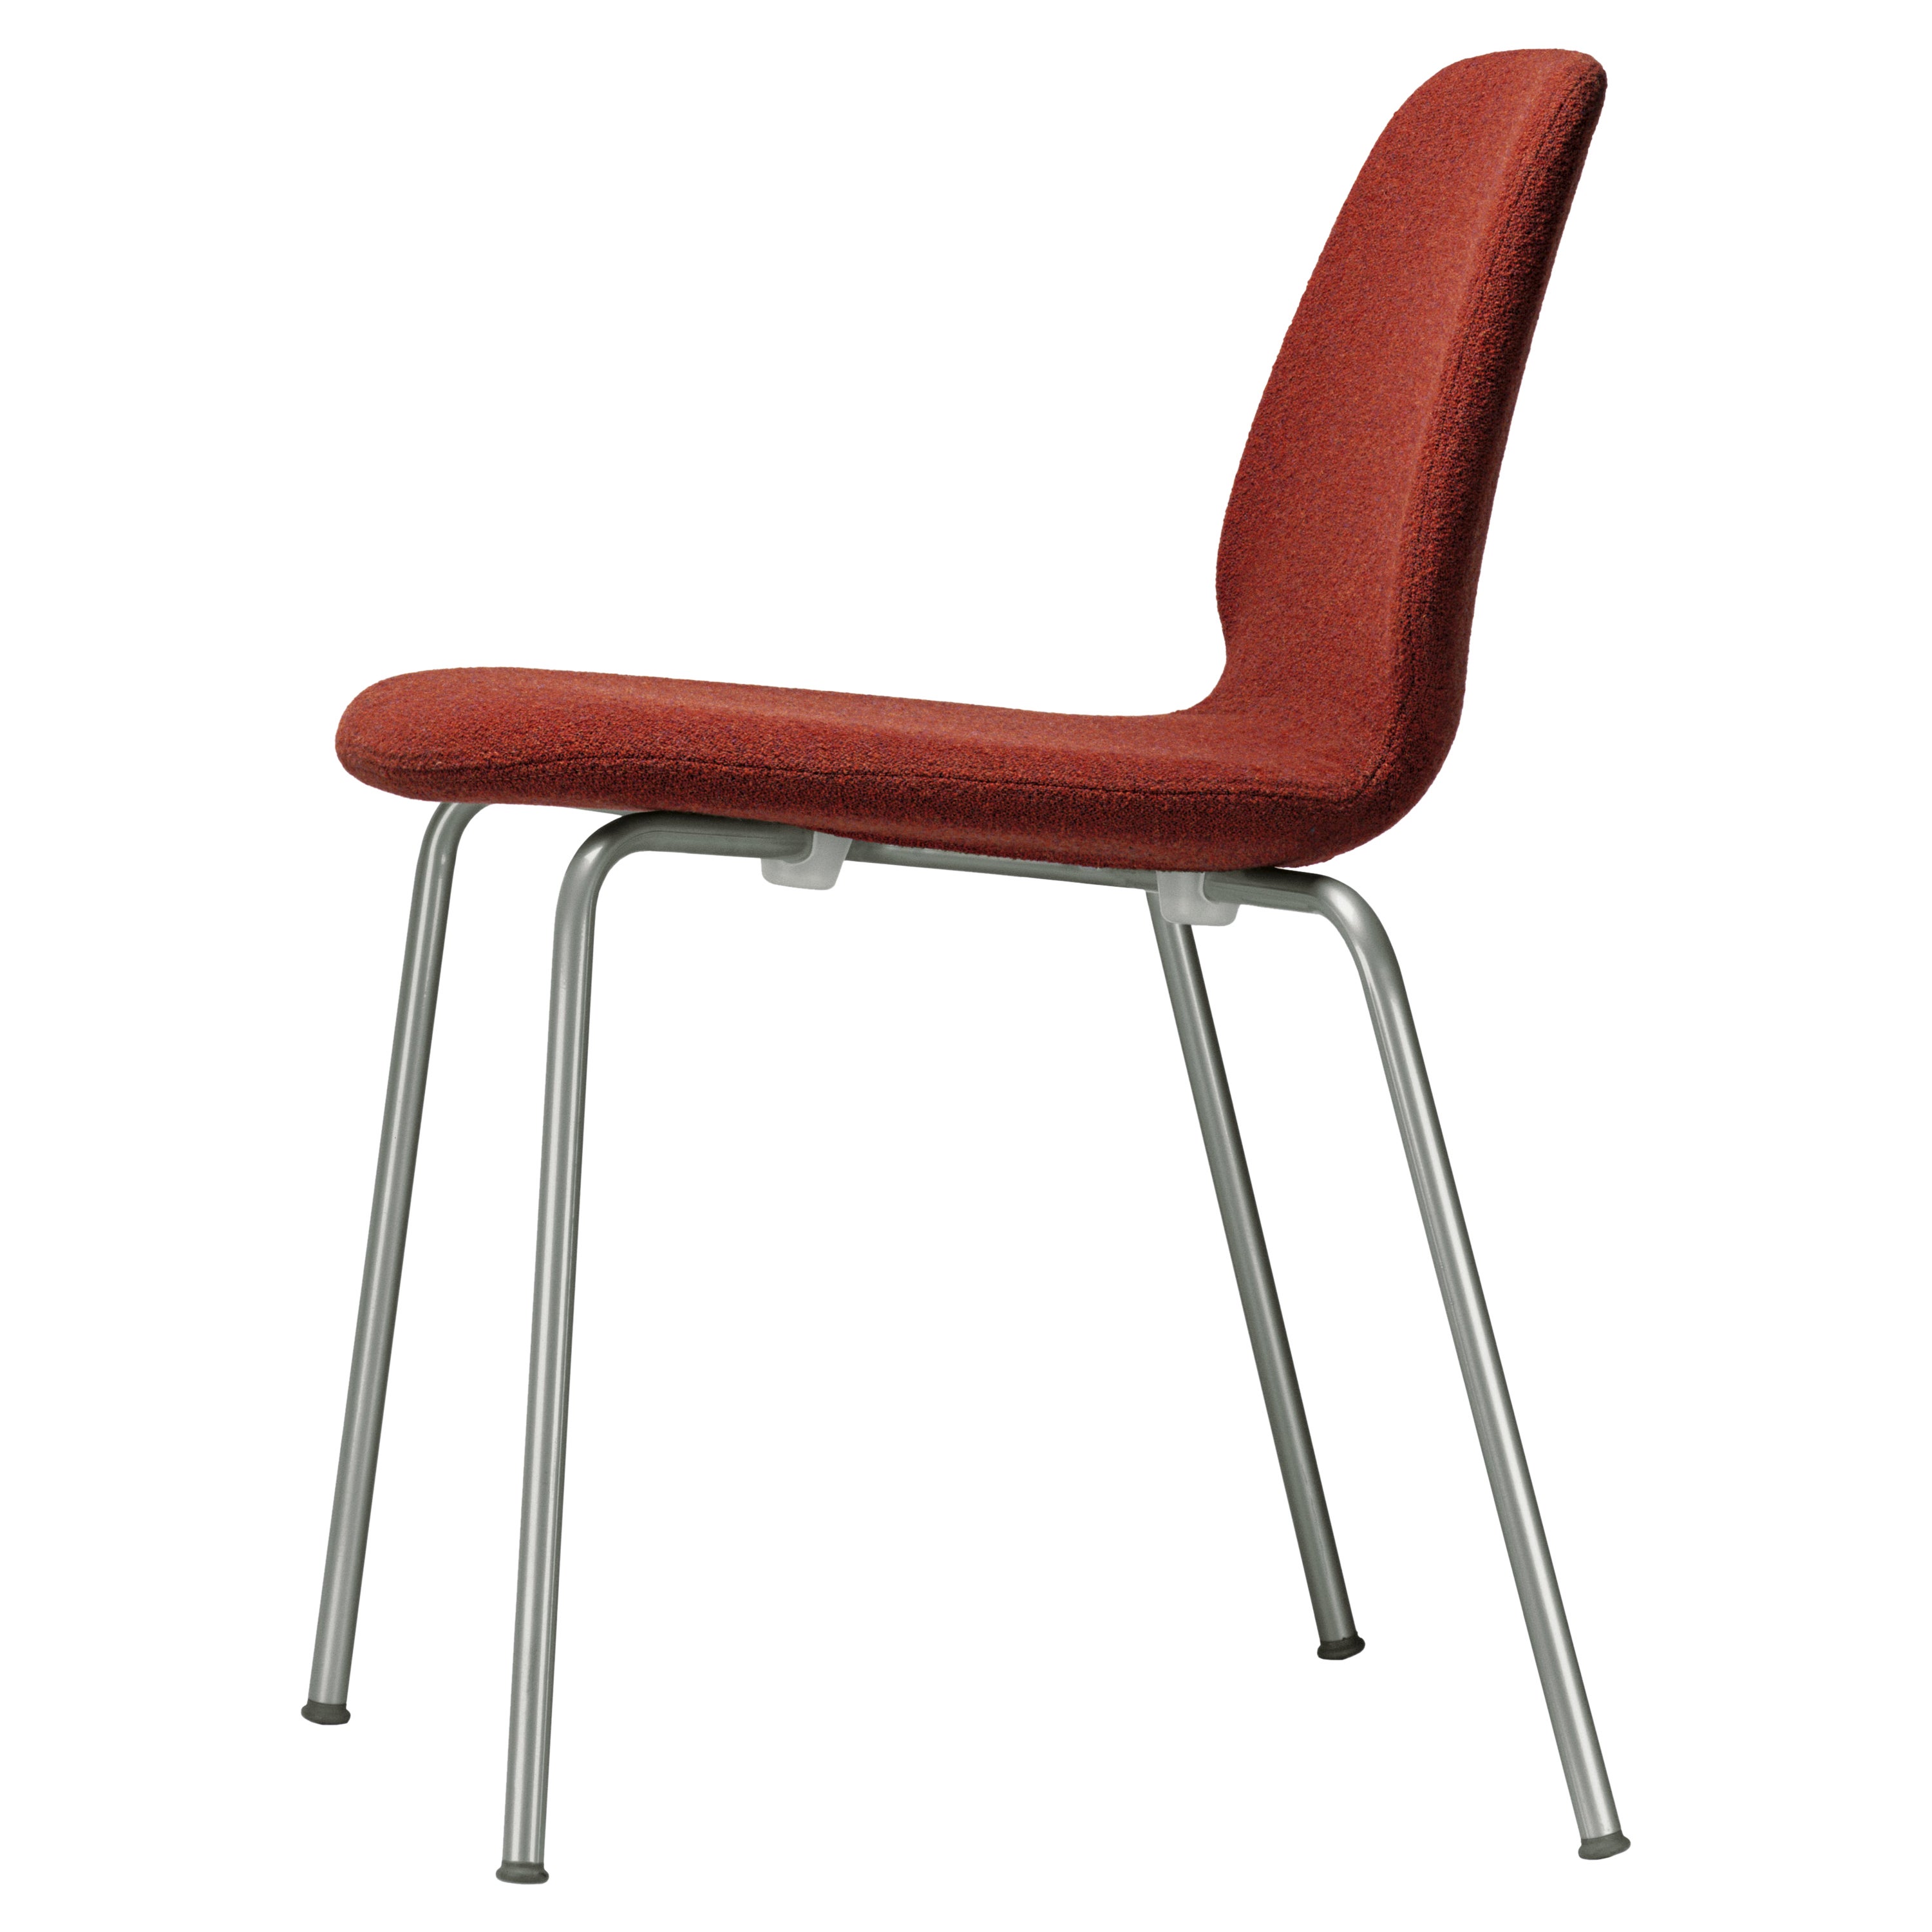 Alias 516 Tindari Chair in Red Seat with Chromed Steel Frame by Alfredo Häberli